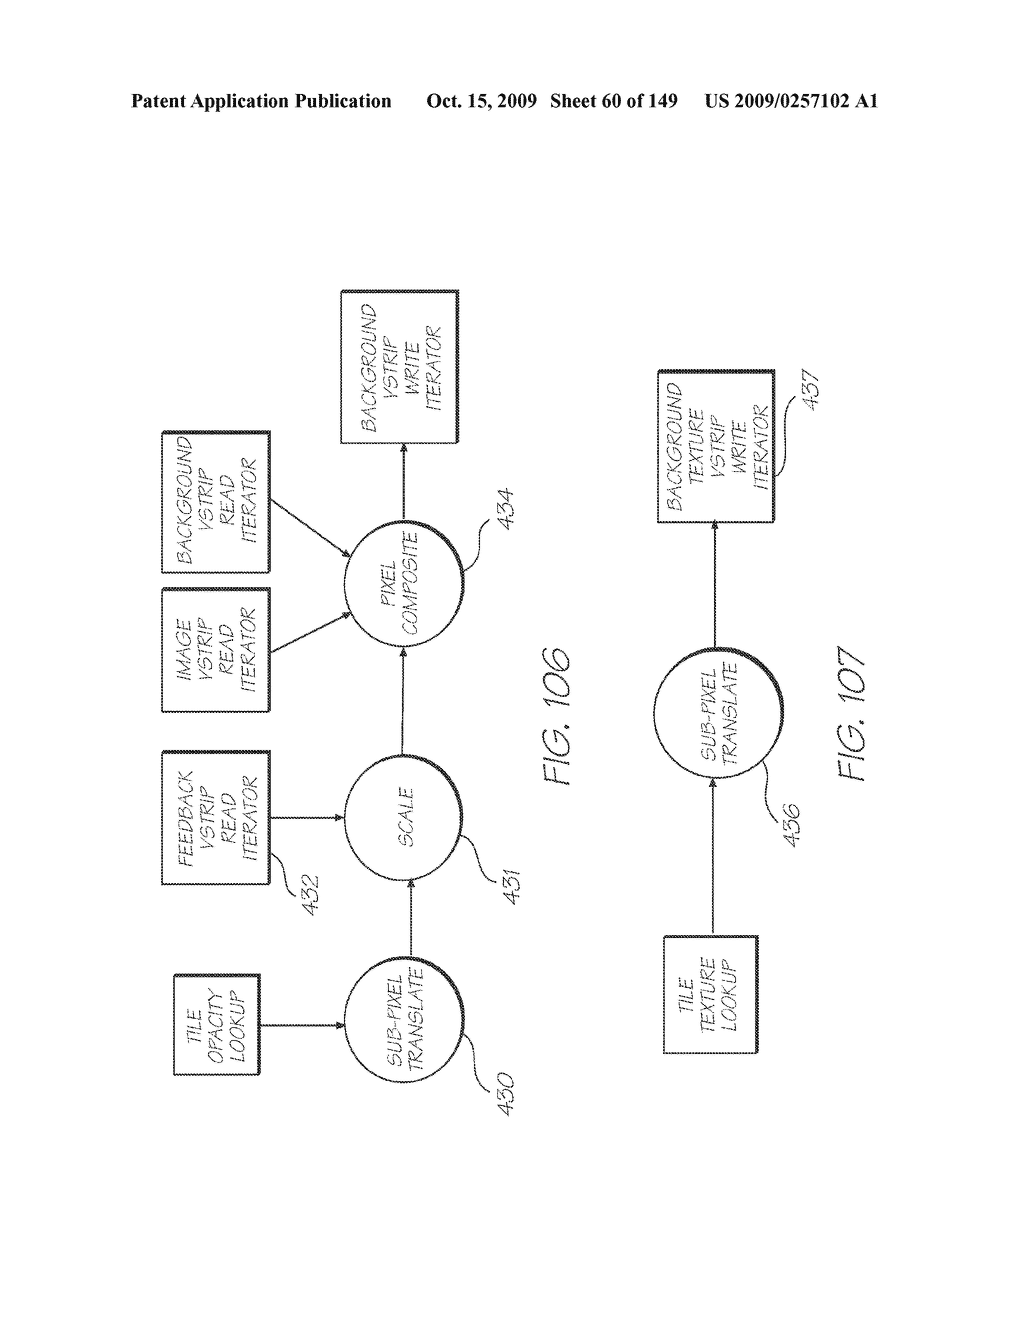 IMAGE PROCESSING APPARATUS HAVING CARD READER FOR APPLYING EFFECTS STORED ON A CARD TO A STORED IMAGE - diagram, schematic, and image 61